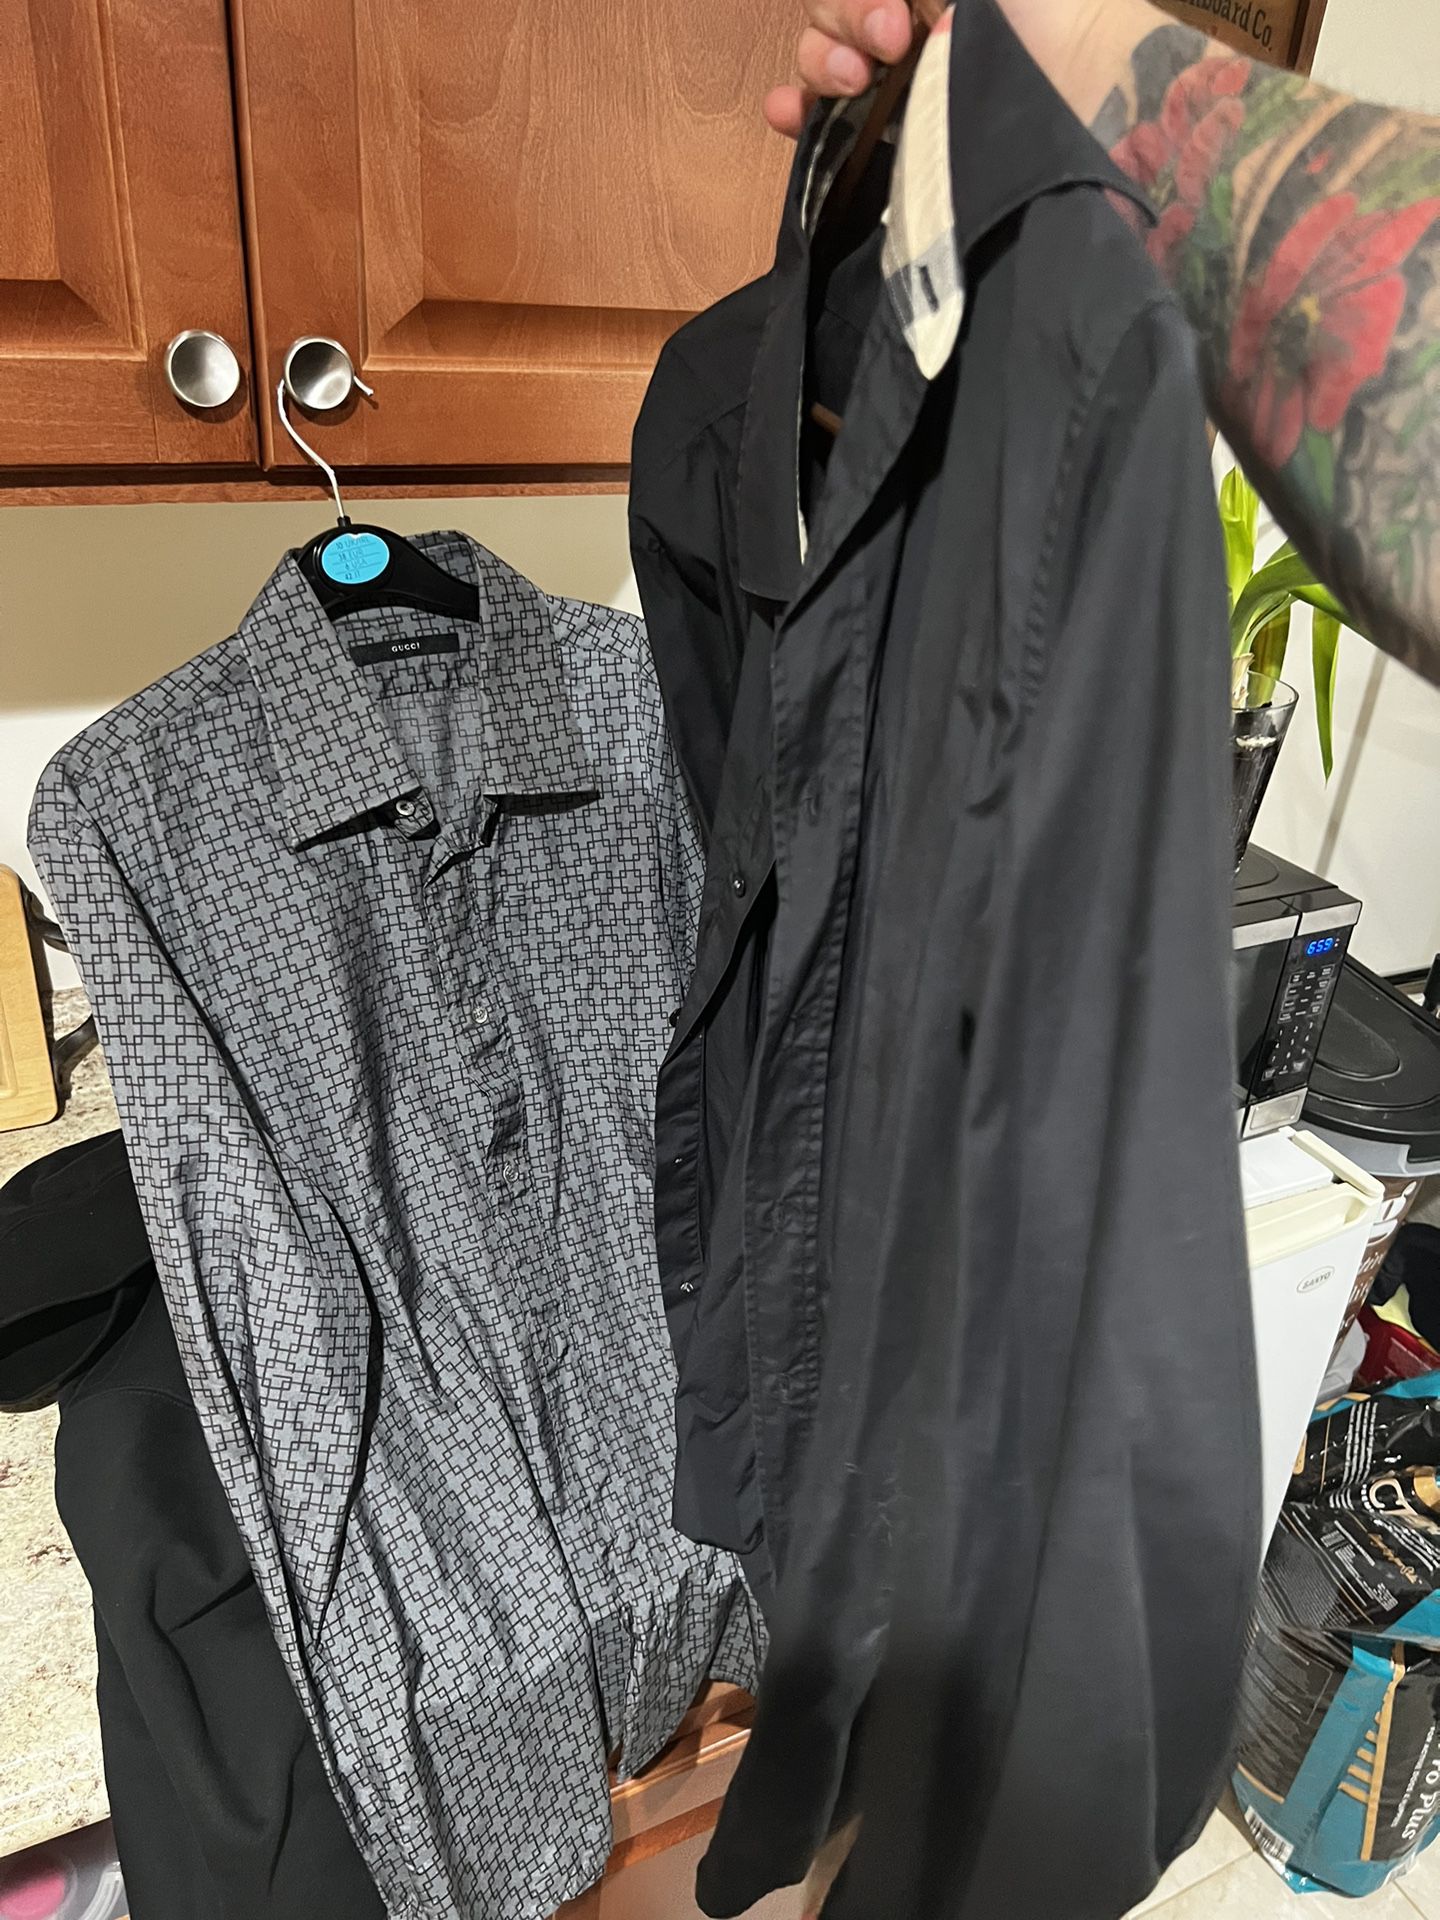 Gucci Button Up Shirts for Sale in Passaic, NJ - OfferUp